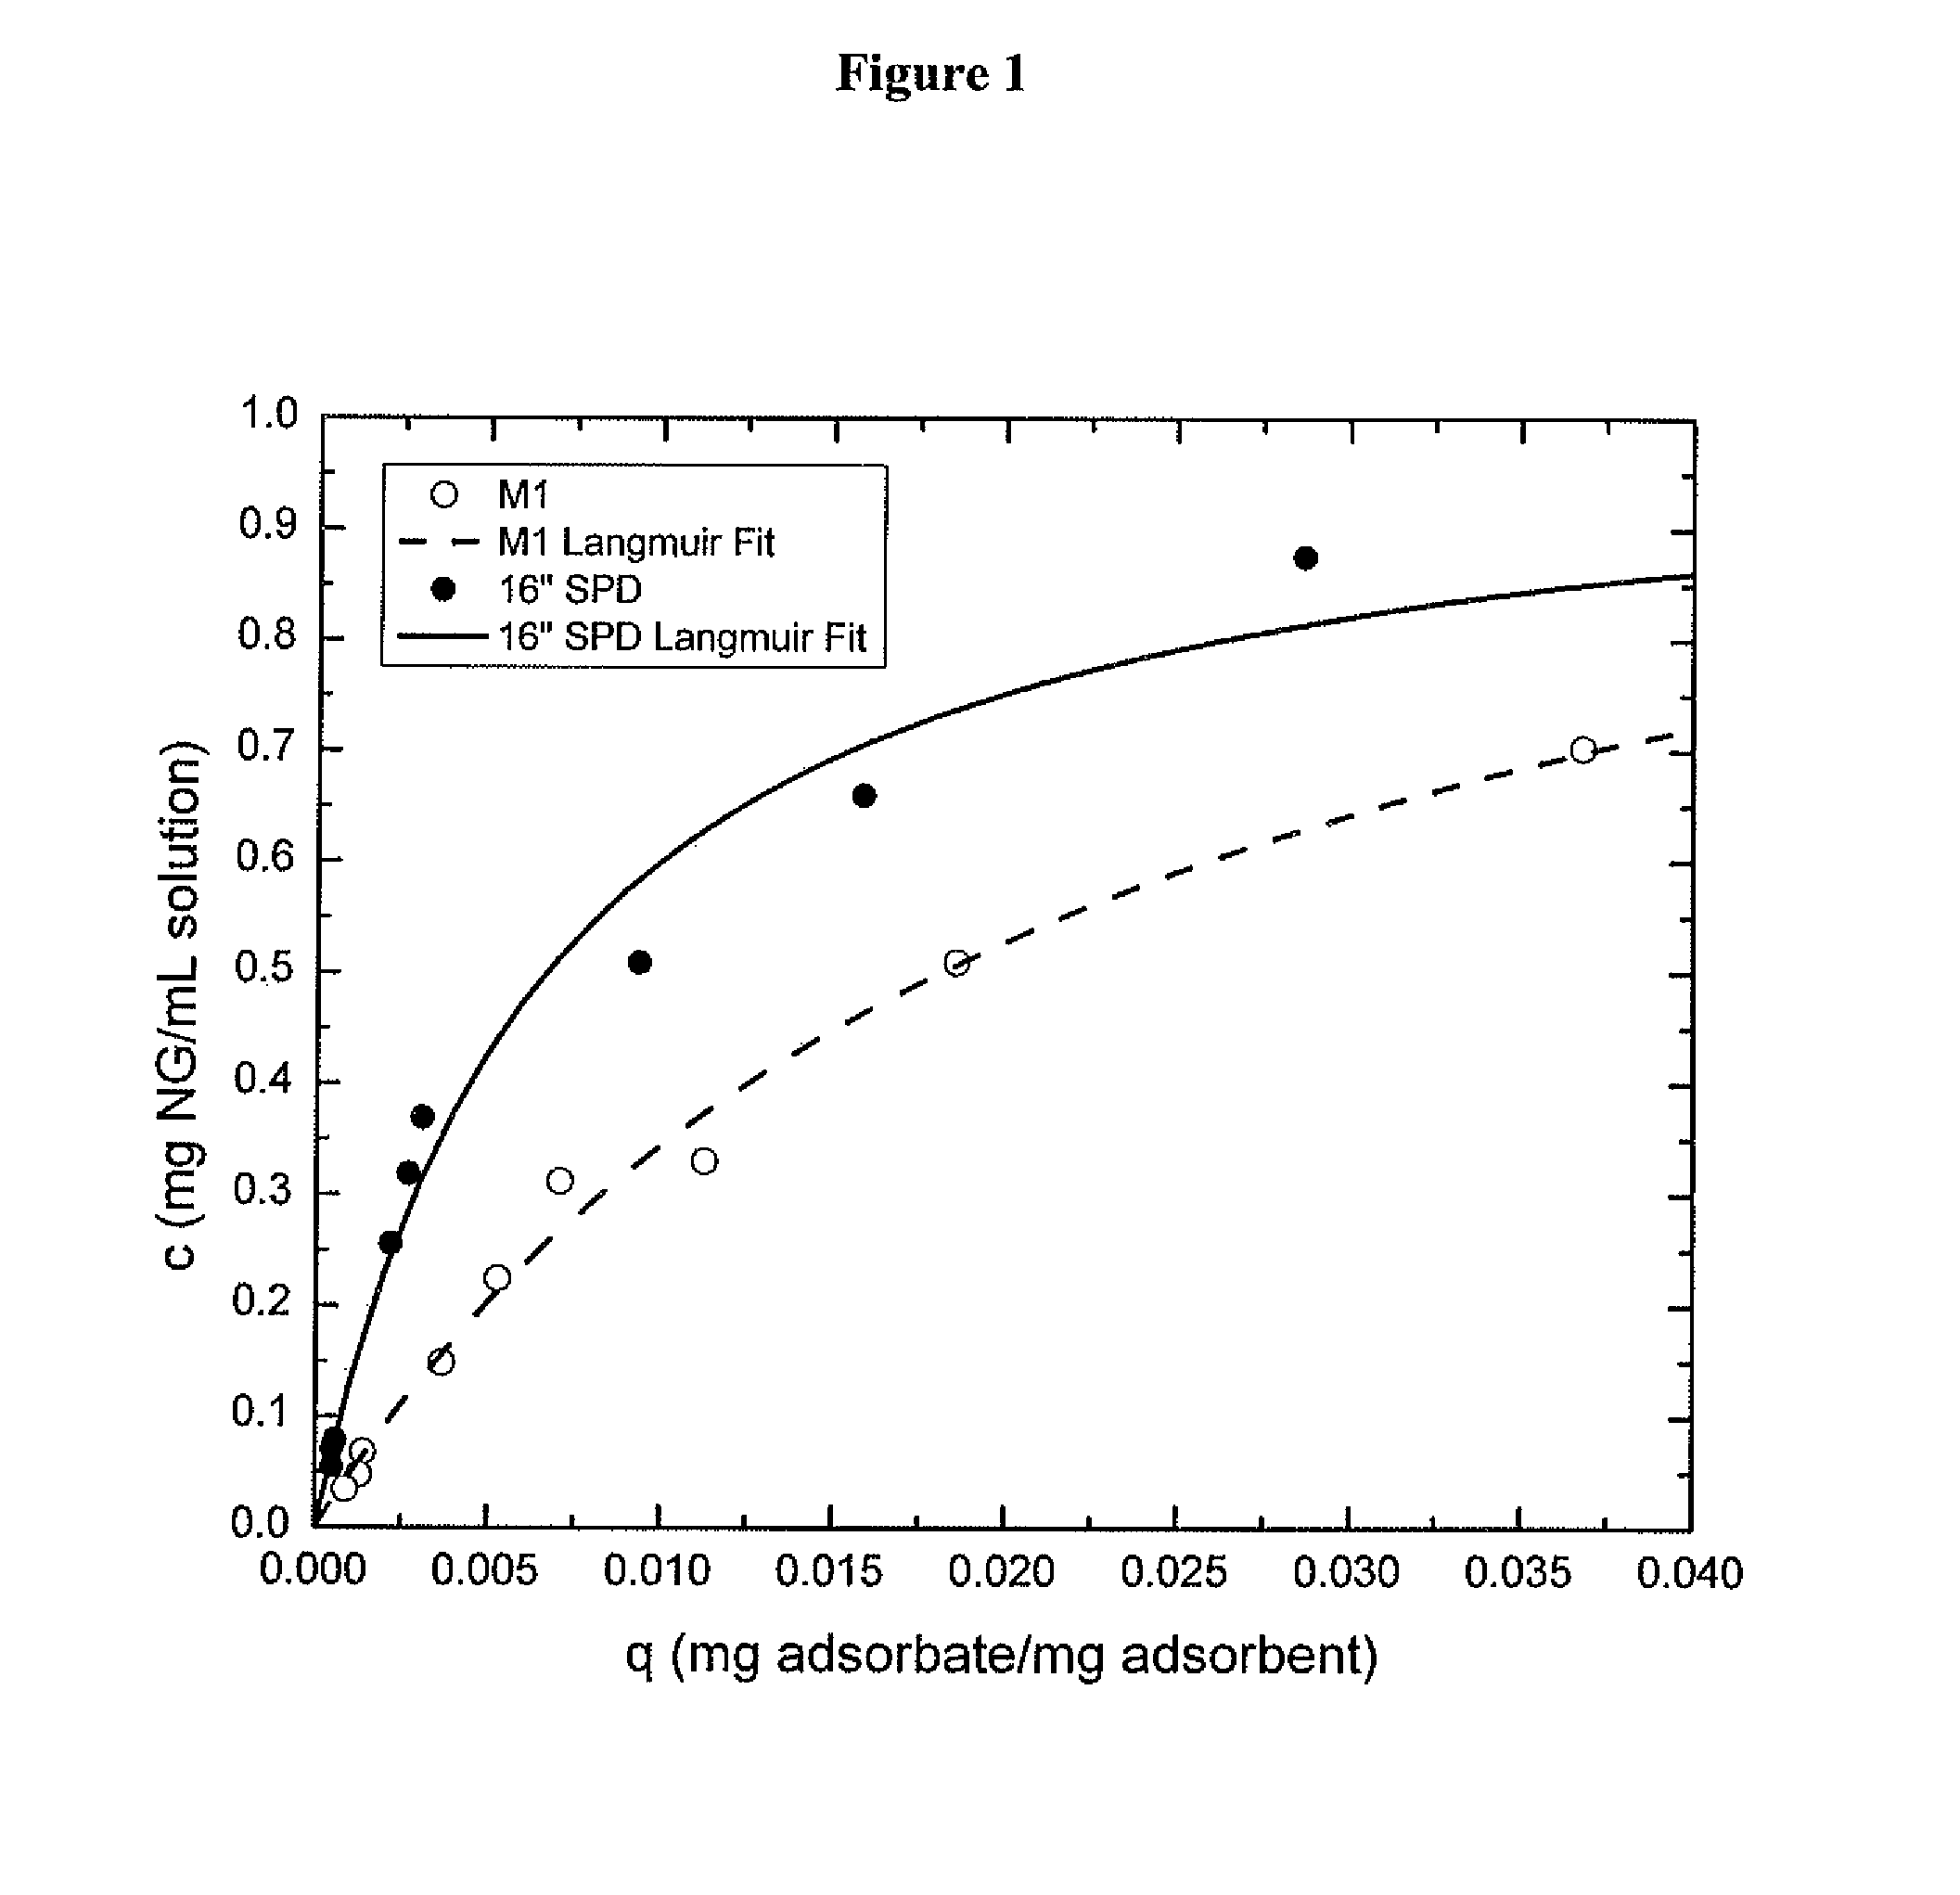 Process for adsorbing nitroglycerine from water streams using nitrocellulose